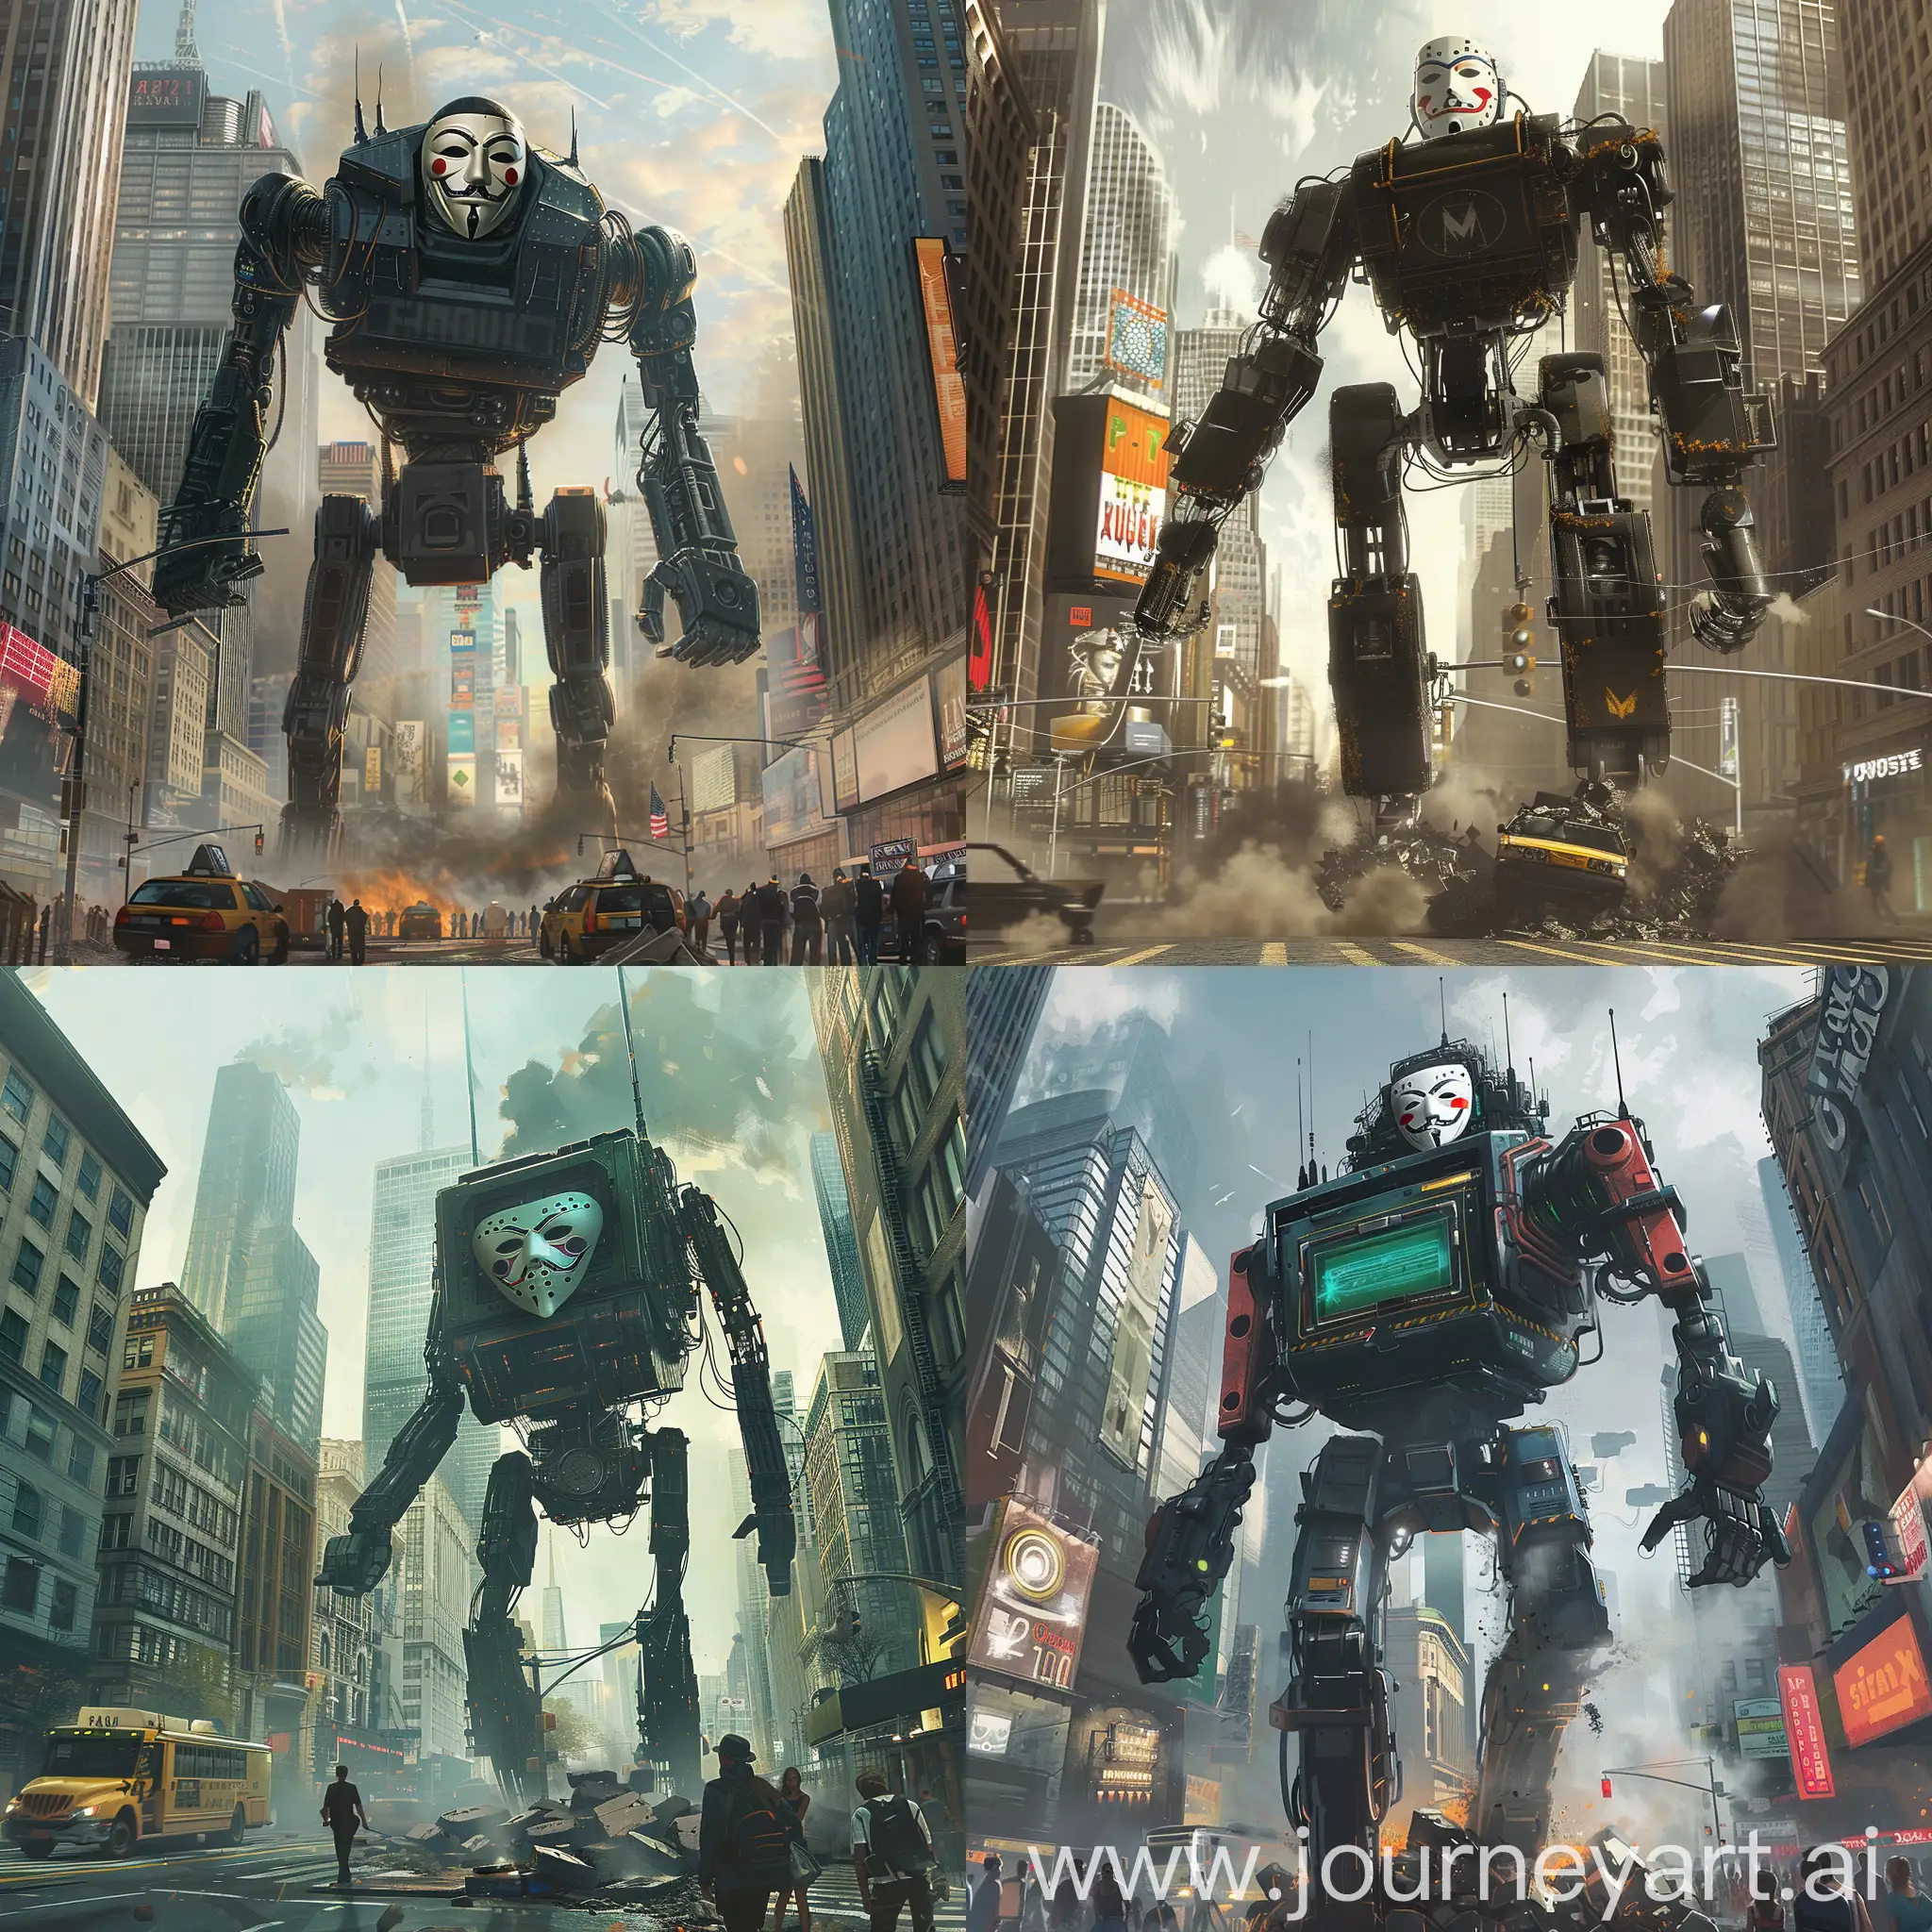 Giant-Anonymous-Masked-Robot-Rampages-Through-Urban-America